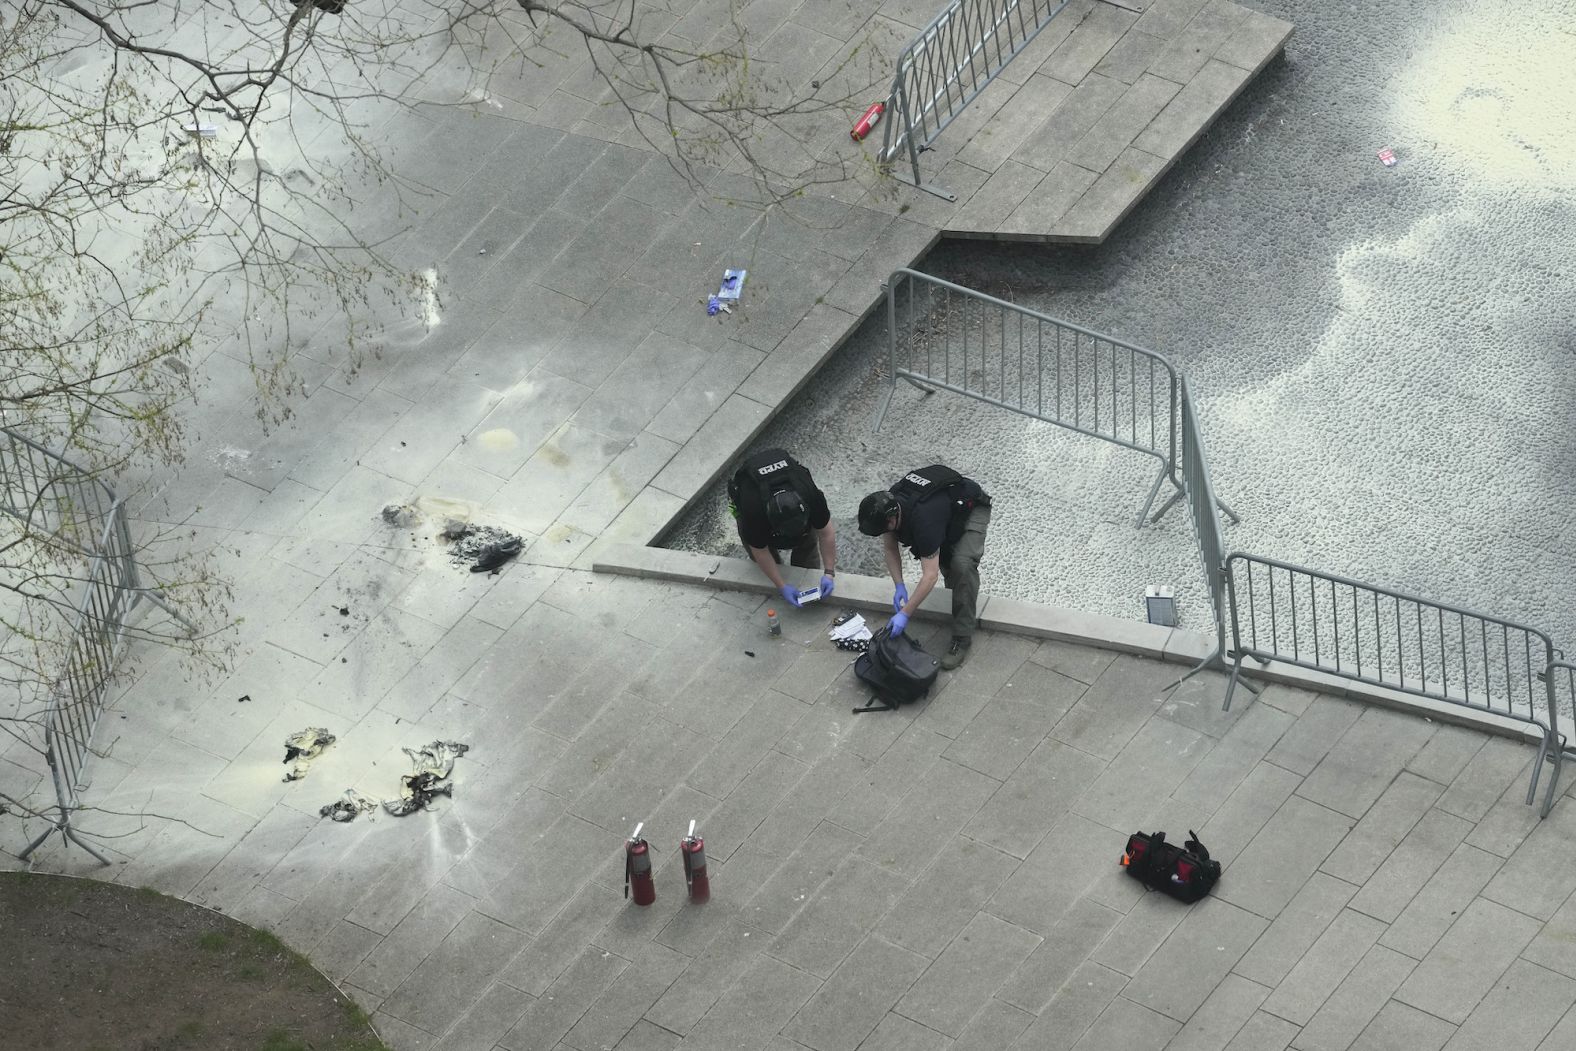 New York police officers inspect a backpack on Friday, April 19, after a man <a href="https://www.cnn.com/politics/live-news/trump-hush-money-trial-04-19-24/h_a0c5ea747751ddad7bc88749d2f559d1" target="_blank">lit himself on fire</a> in a park outside the criminal court in Manhattan where former US President Donald Trump is standing trial.